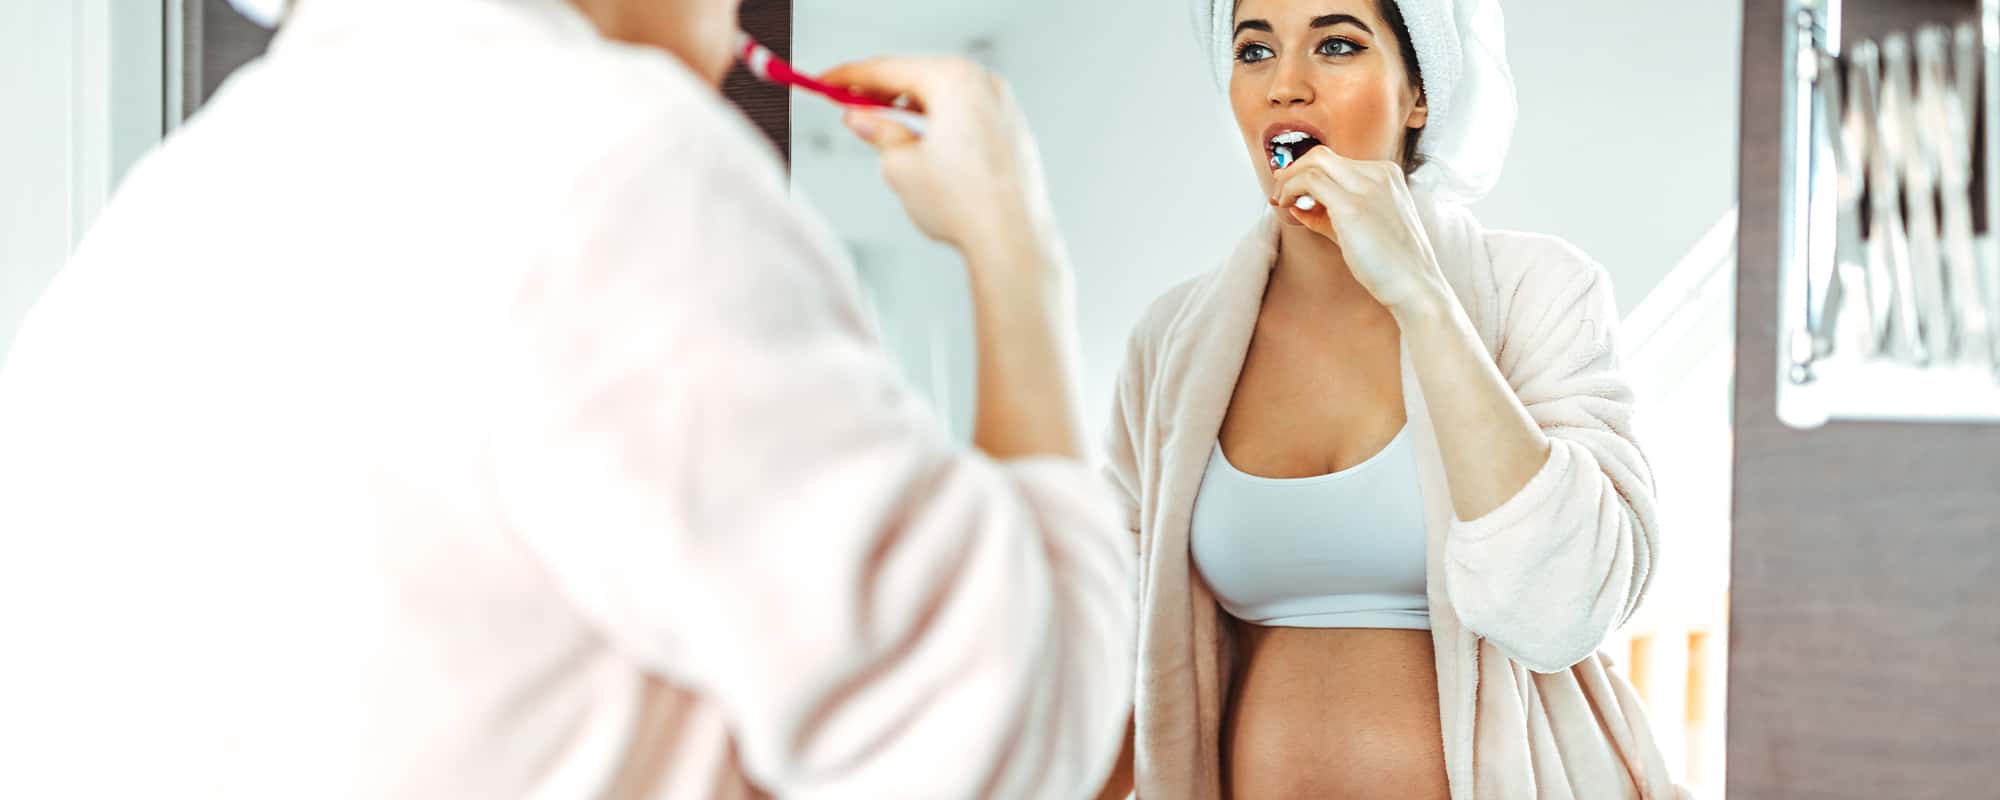 Does Pregnancy Affect Oral Health? Myths Busted